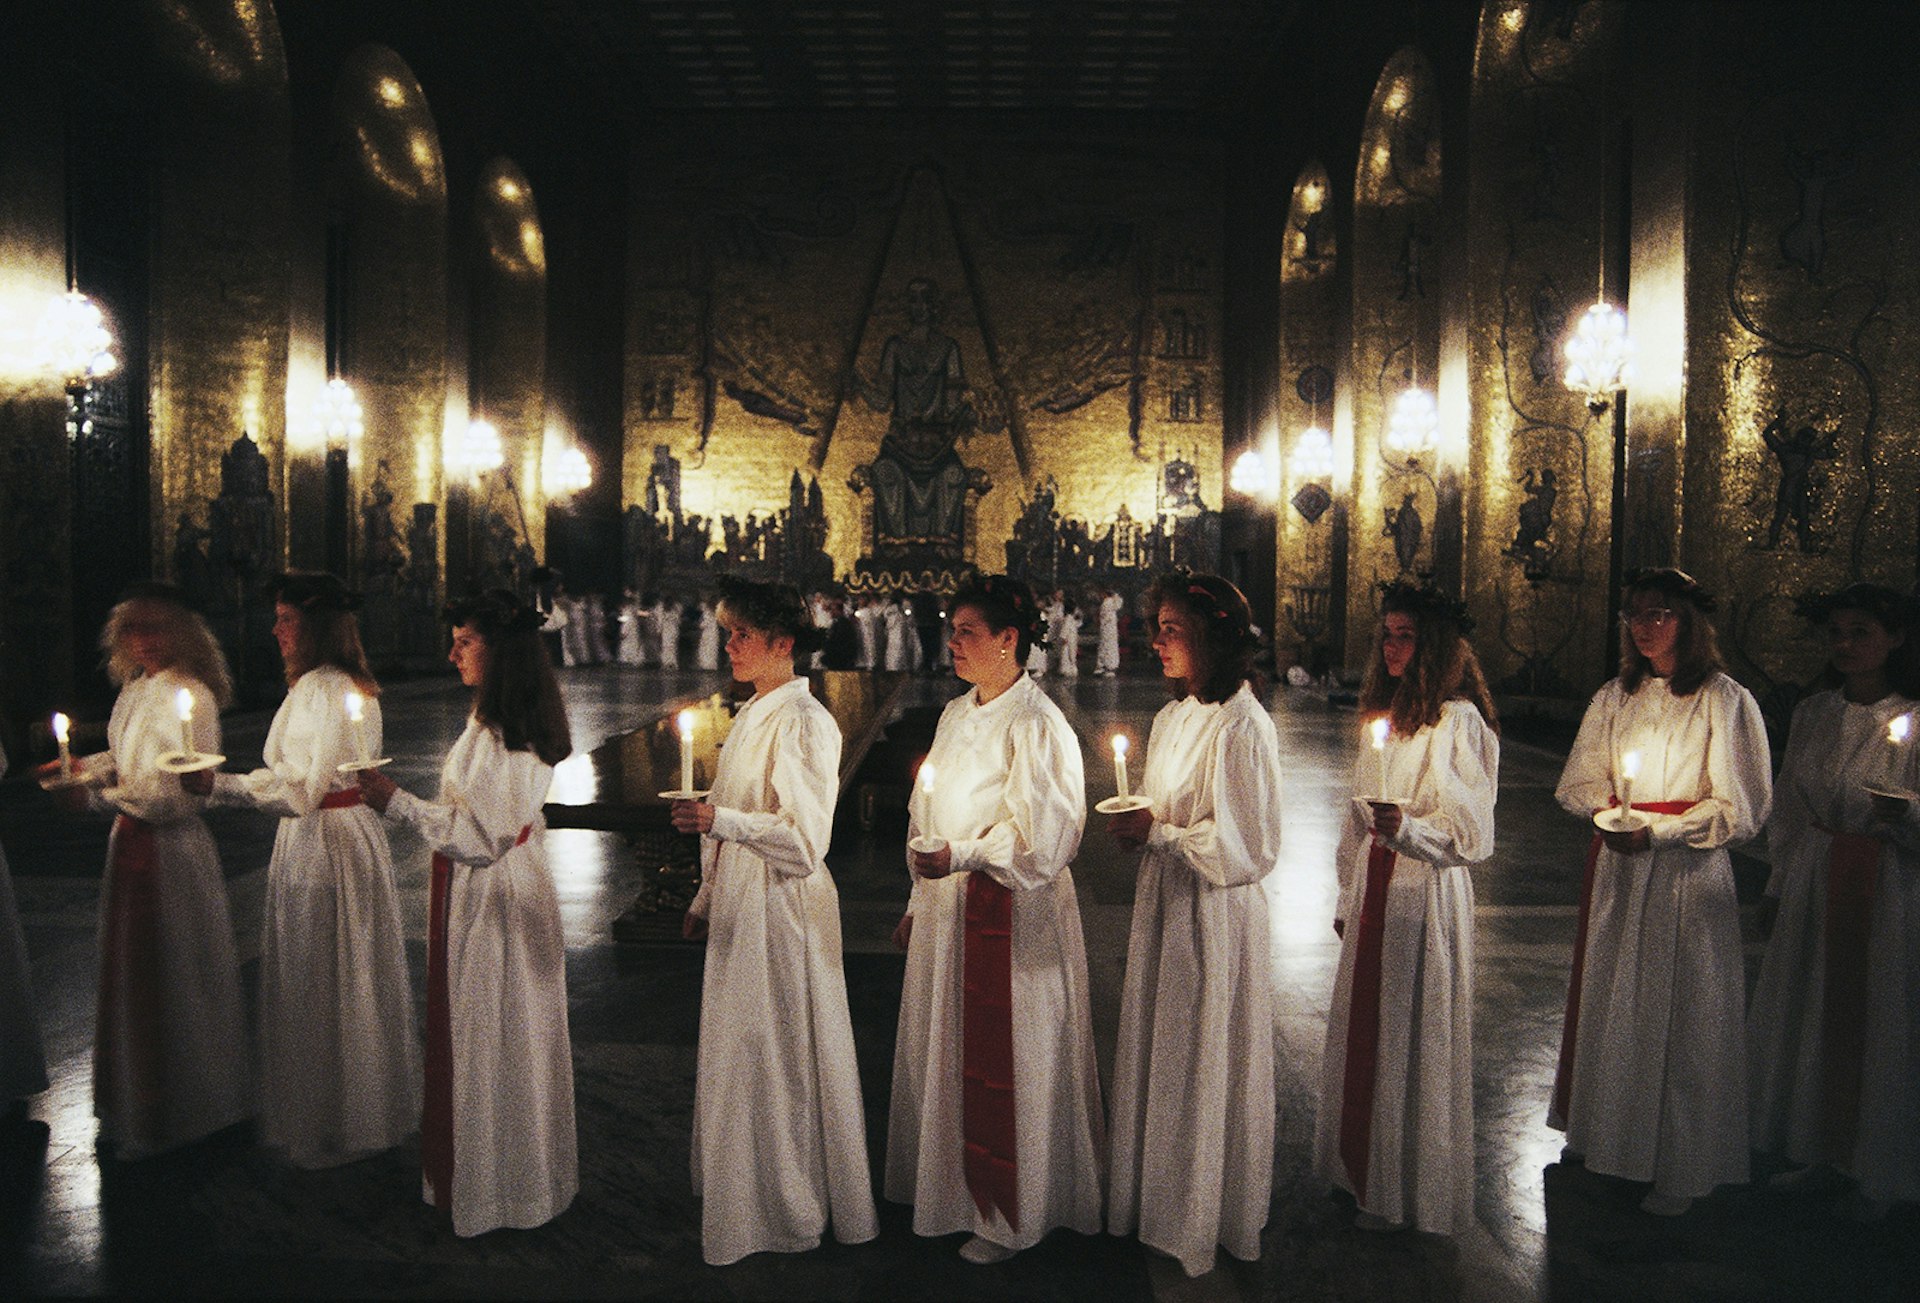 A procession taking place during the Feast of Santa Lucia in Stockholm, Sweden